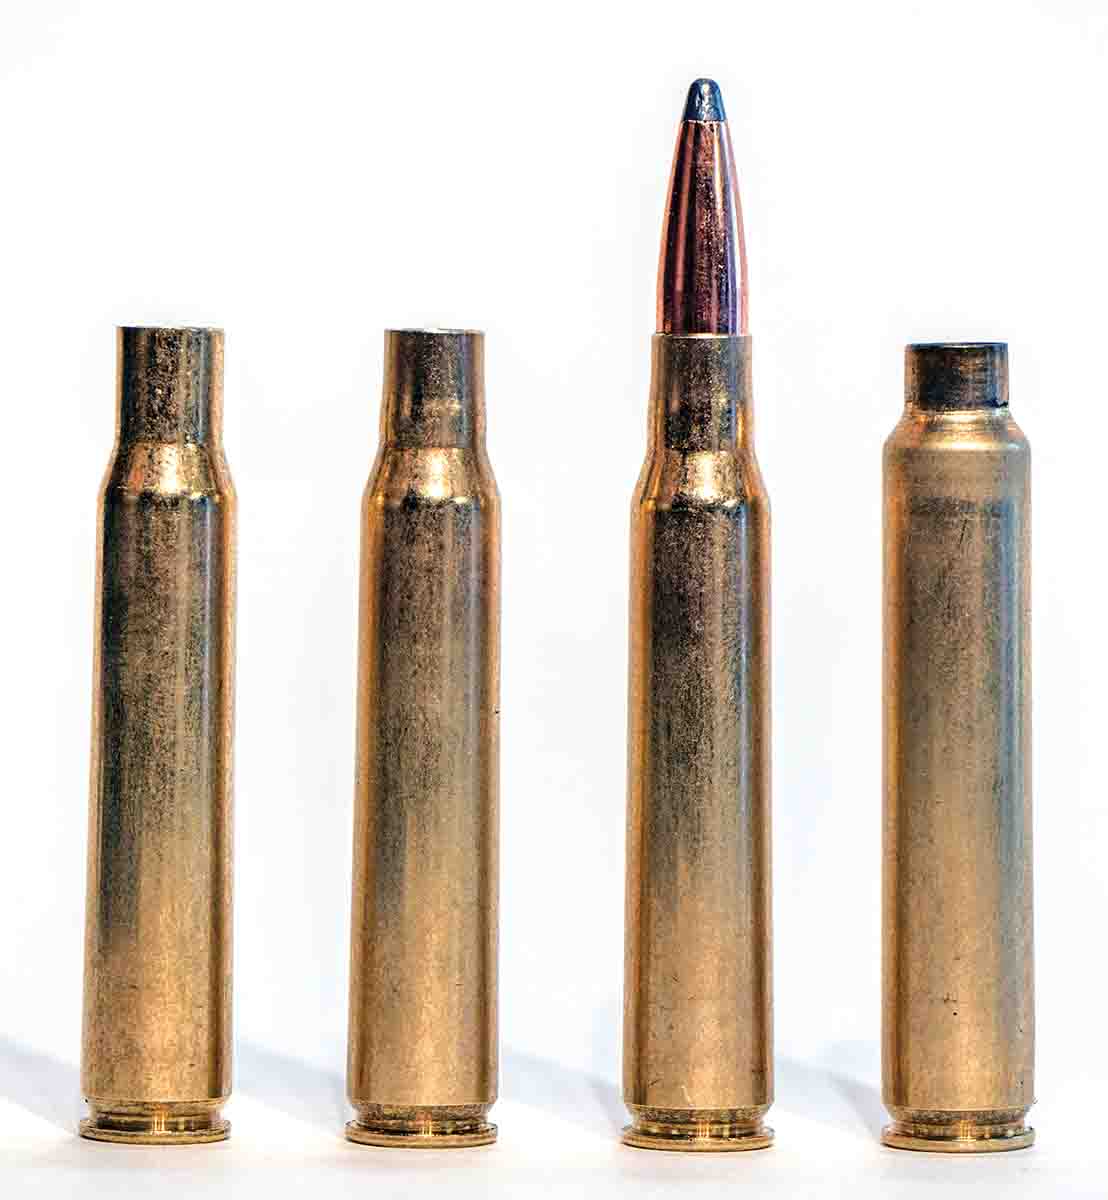 Making 7mm JRS cases from .30-06 brass requires (left to right): partially neck-sizing the case, loading it with a midrange .280